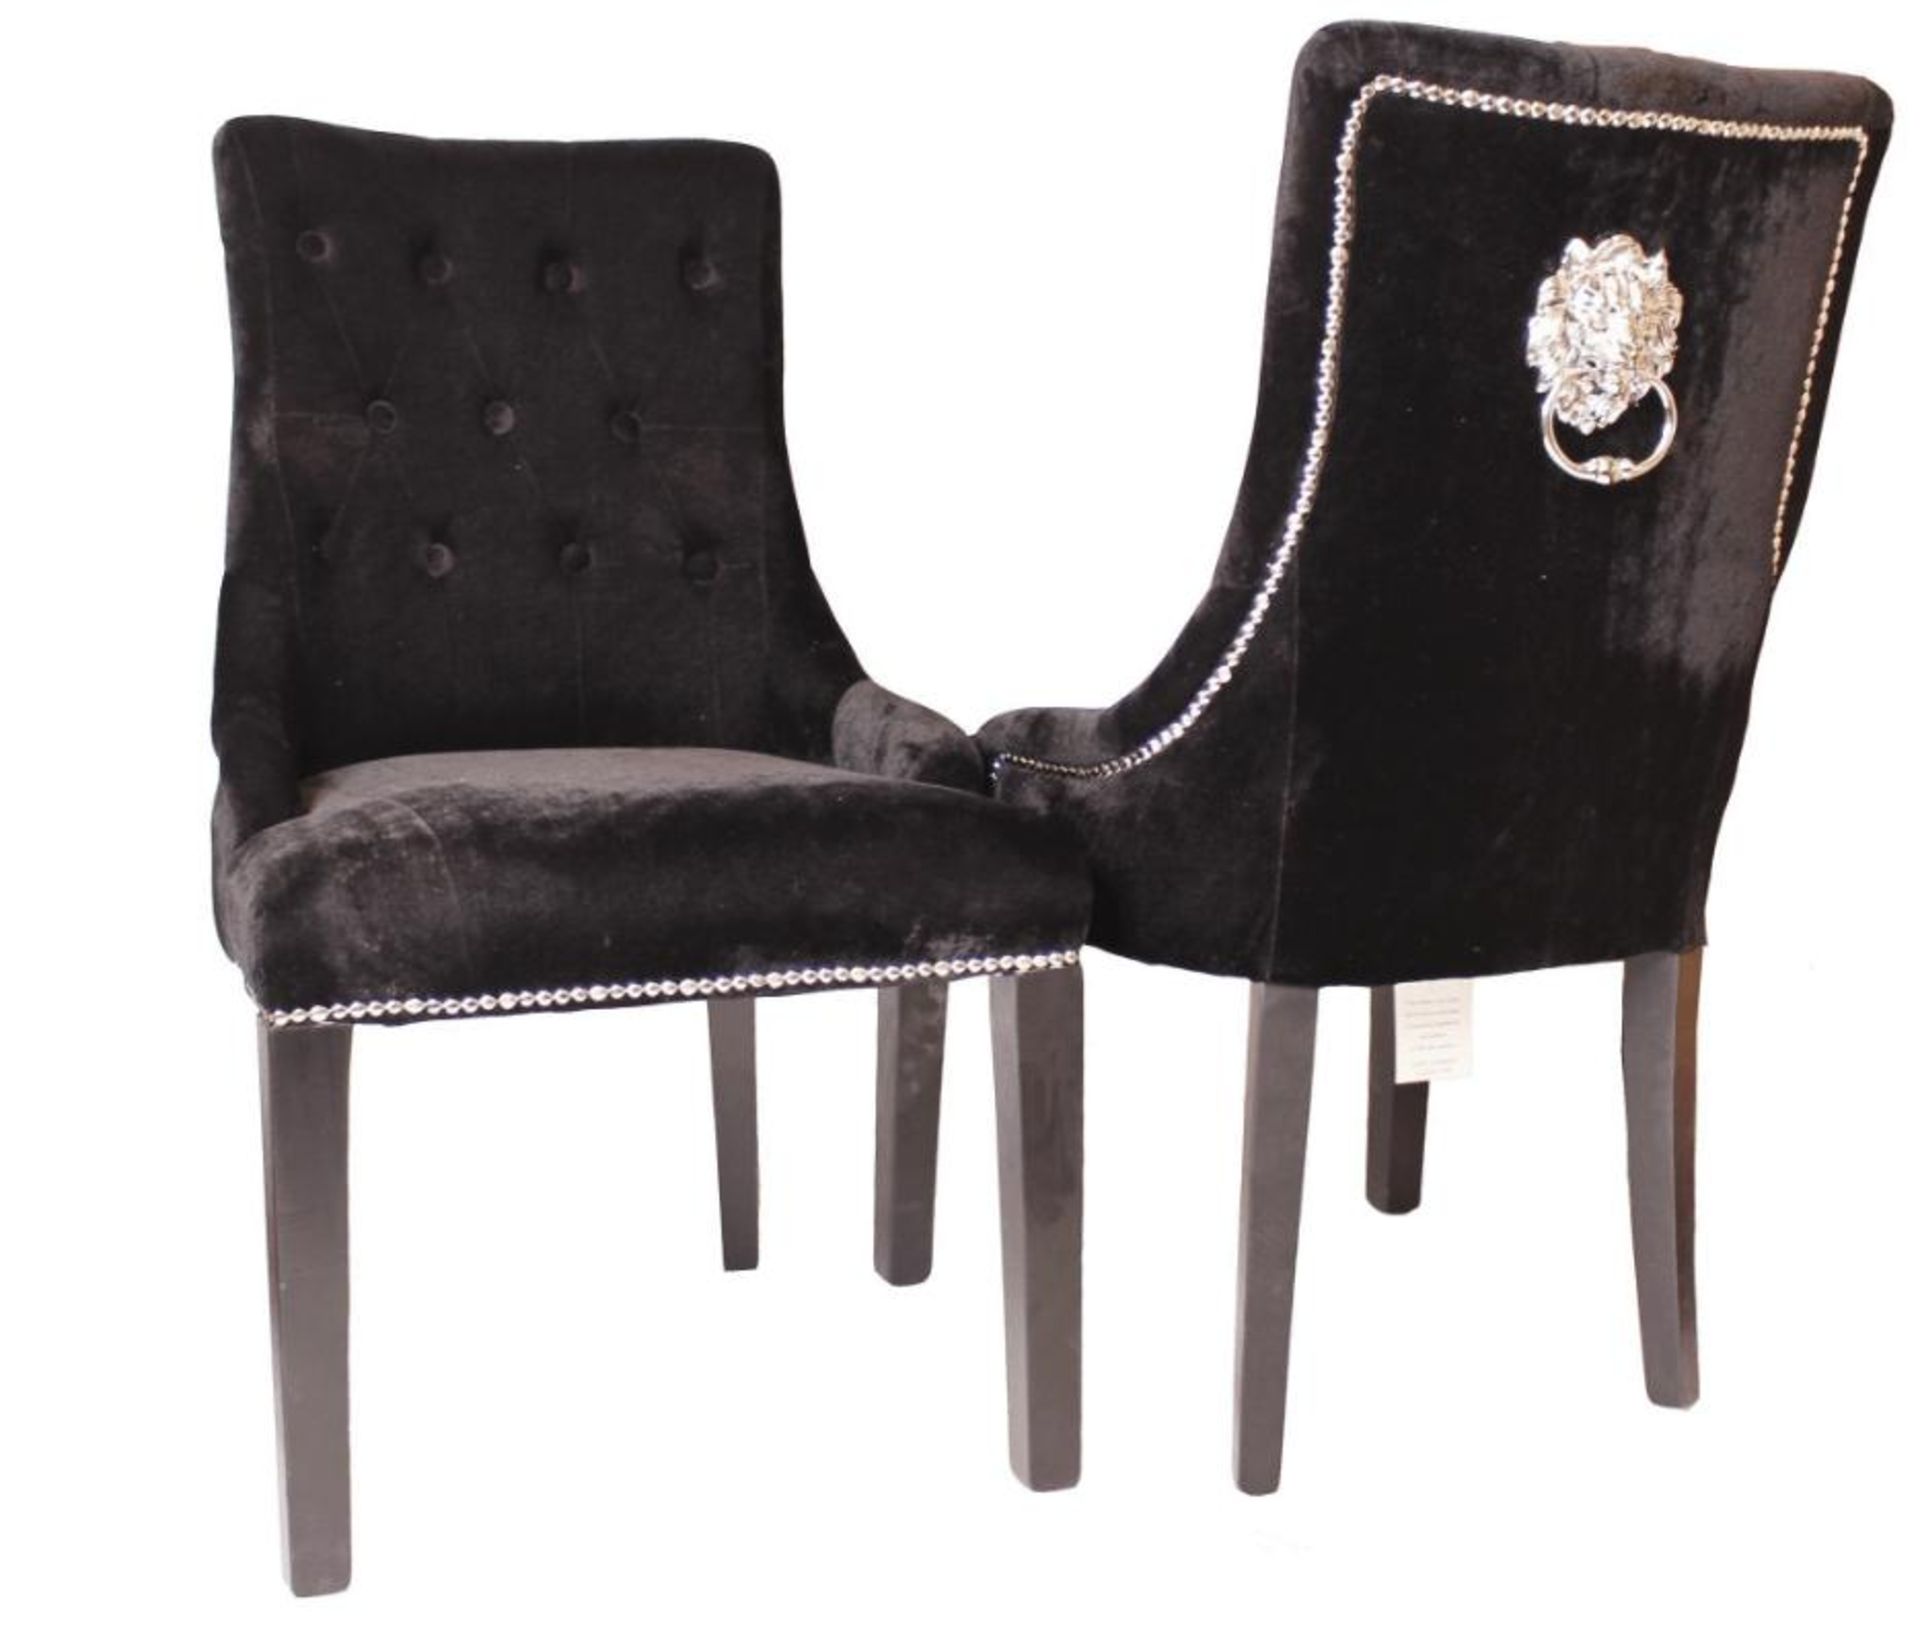 6 x HOUSE OF SPARKLES Luxury Vintage-style 'LION' Button-Back Dining Chairs In Light Grey Velvet